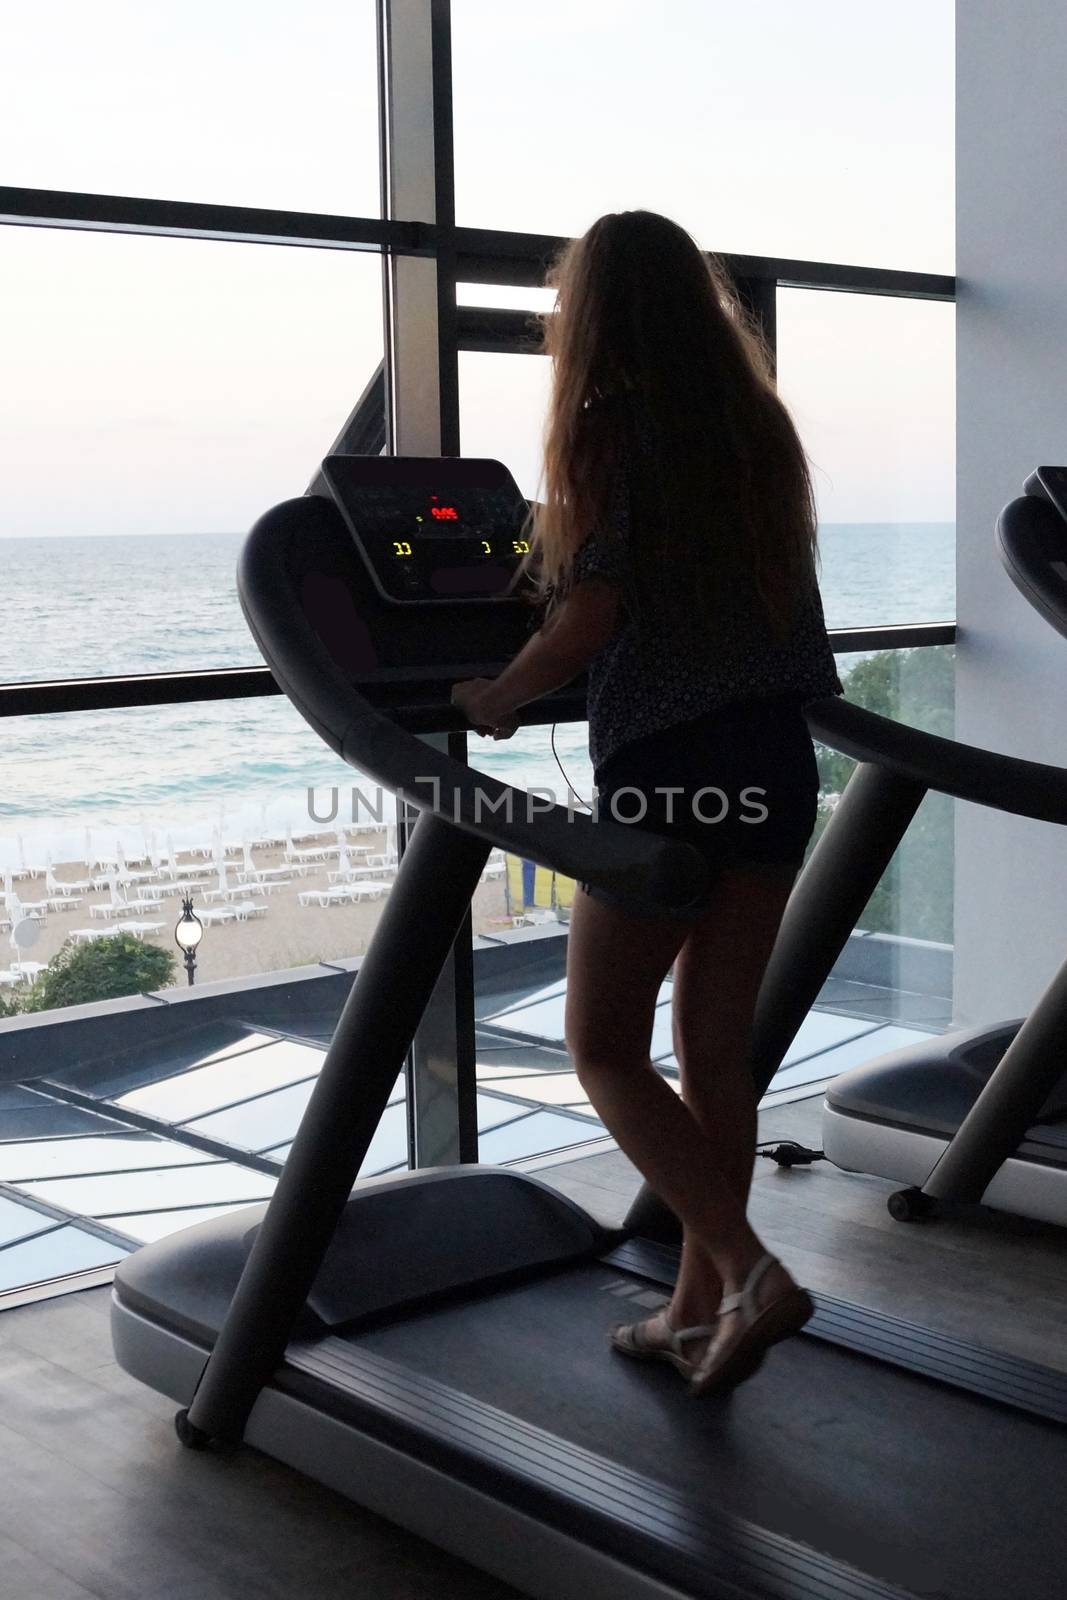 teenage girl on a treadmill in the gym in front of the window with a sea view, back view by Annado